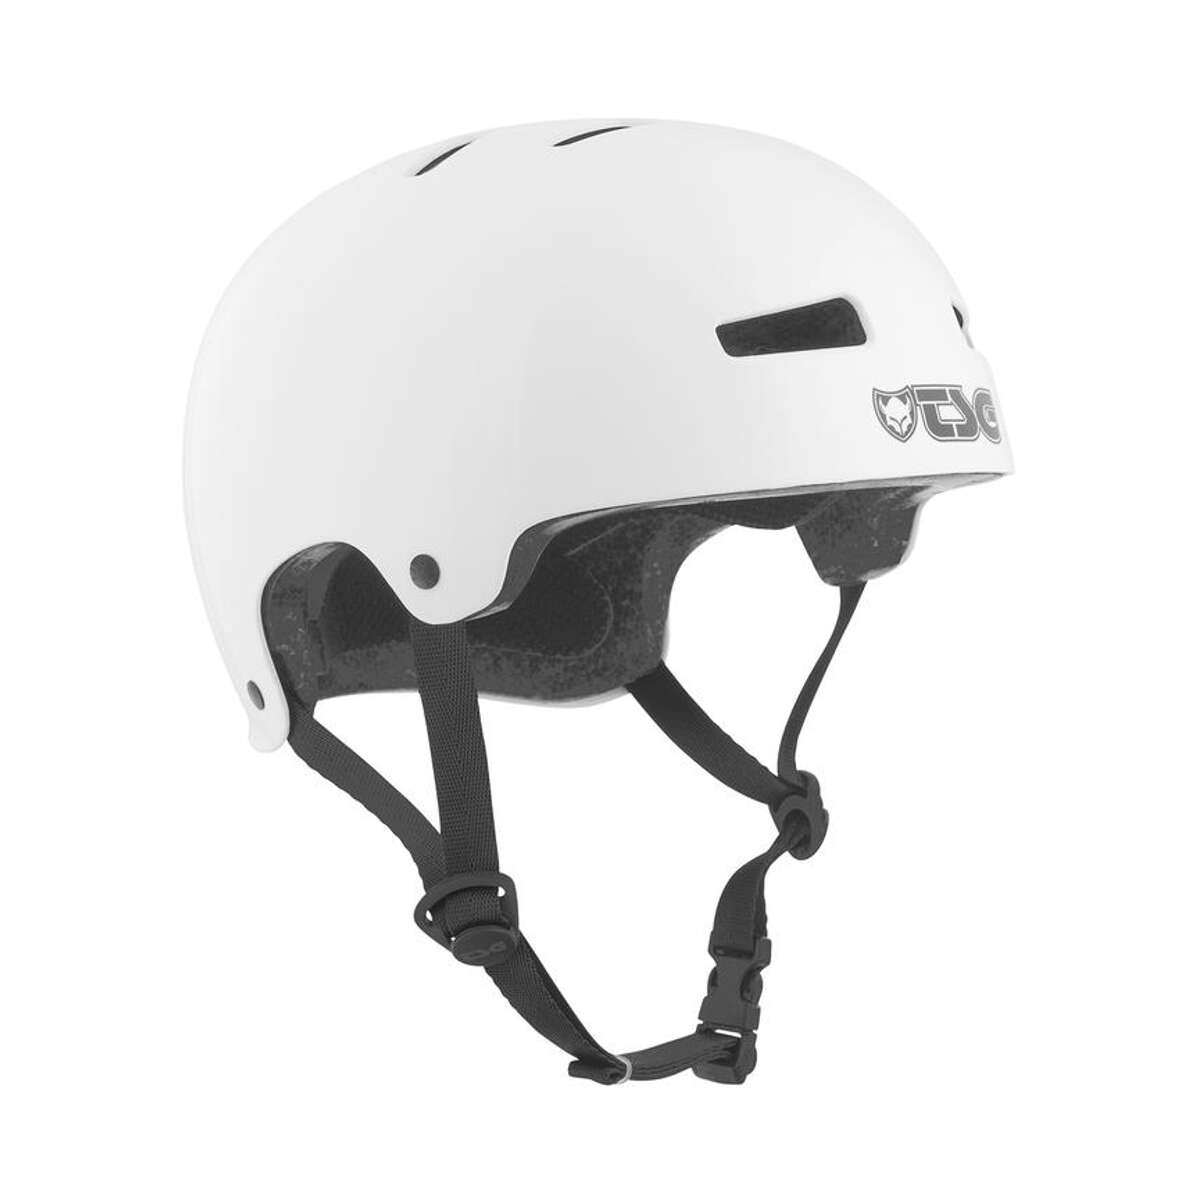 TSG Bimbo Casco BMX/Dirt Evolution Youth Injected Color - Injected White